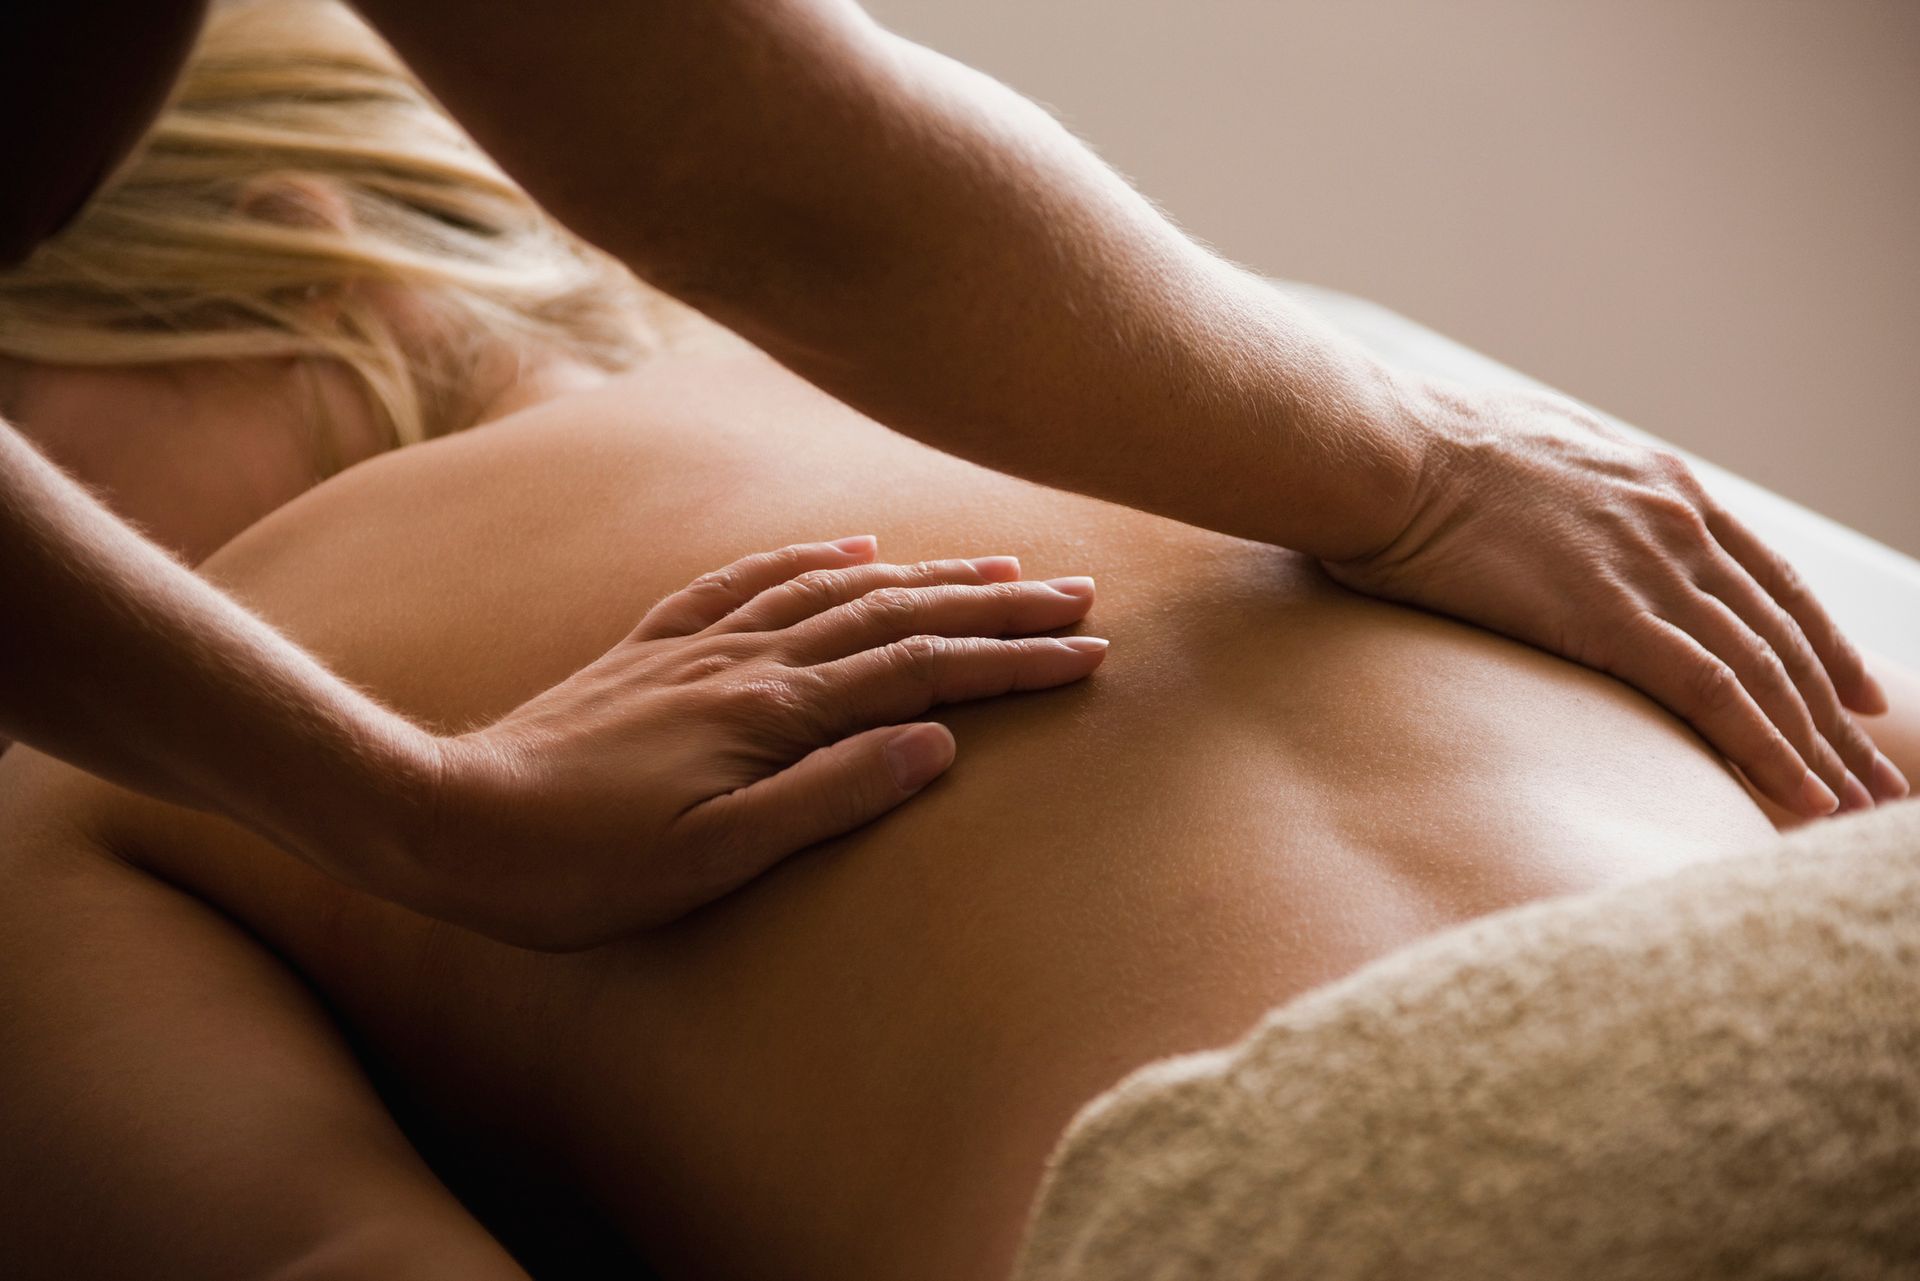 A Woman Is Getting a Massage on Her Back at A Spa - Honolulu, HI - Hawaii Choi Spa